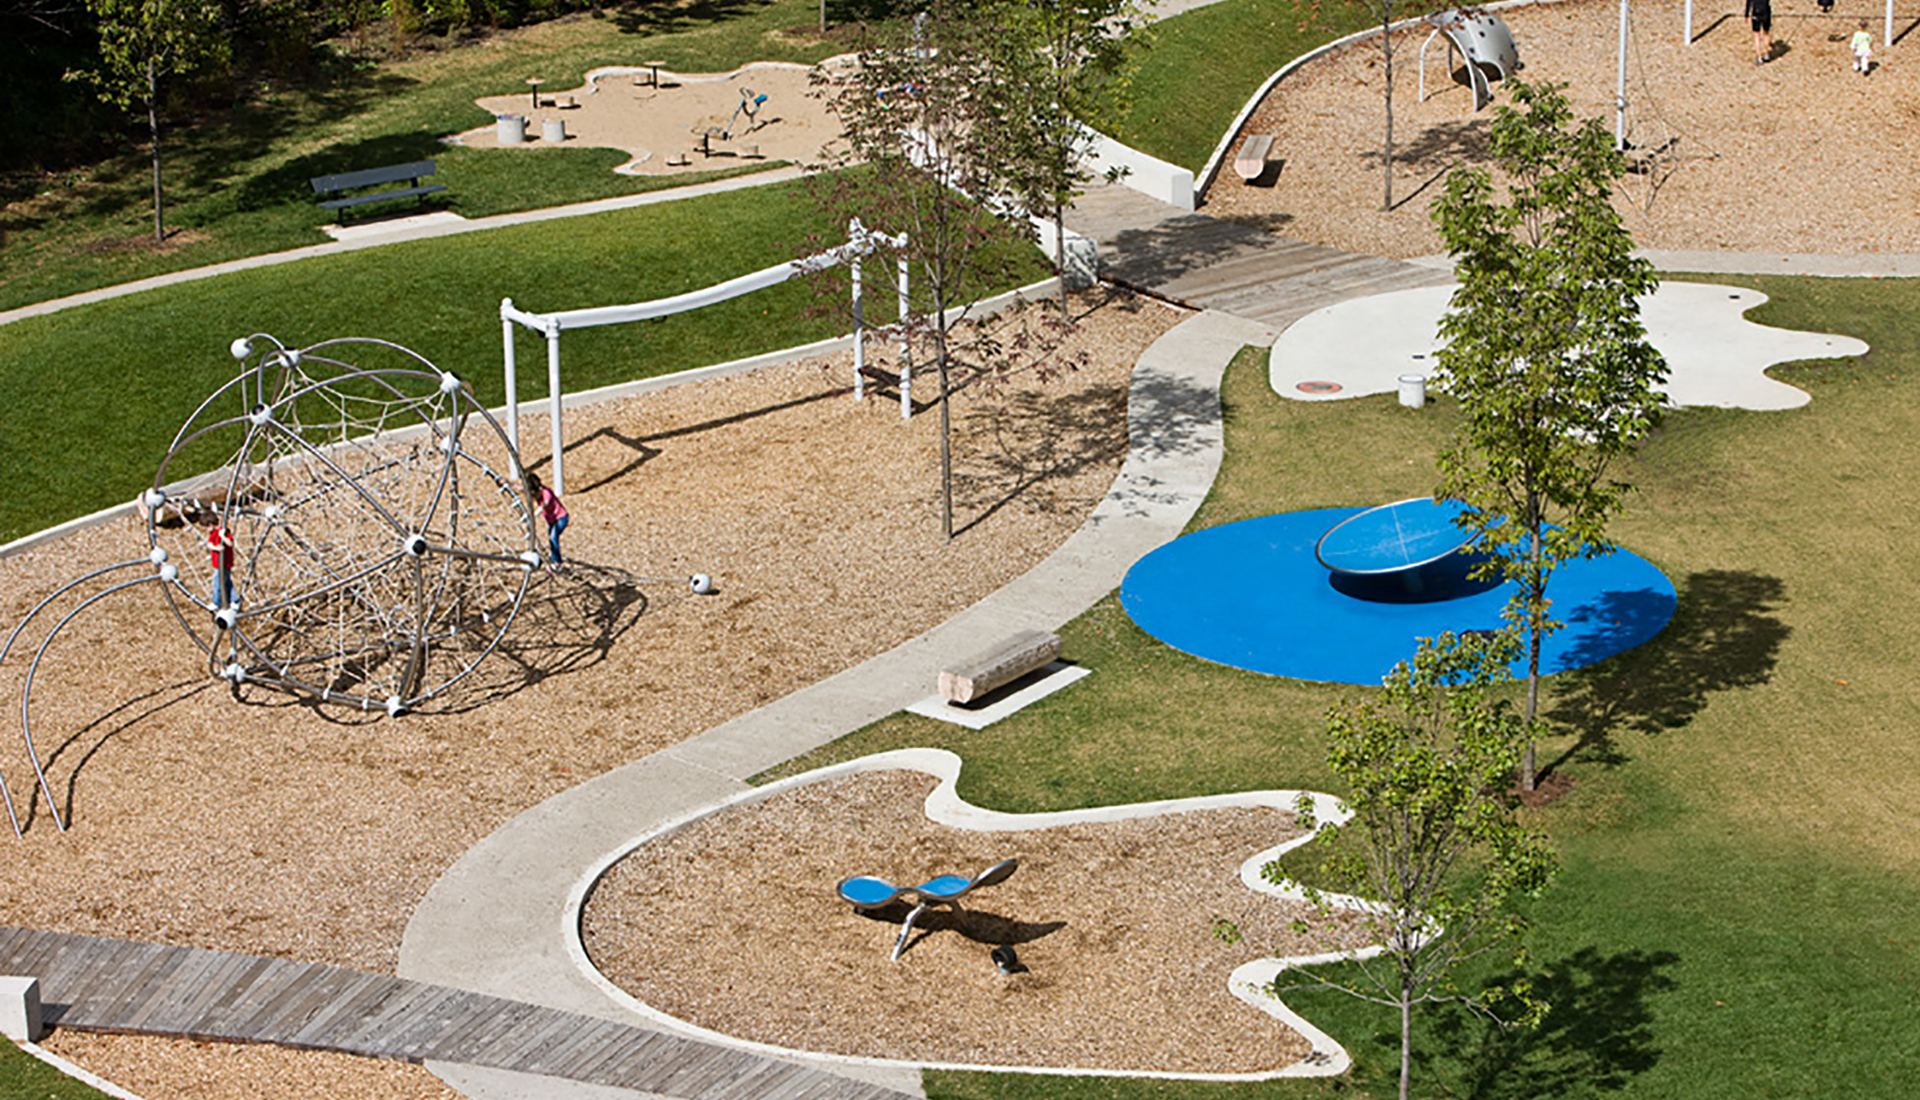 A childrens playground with swings, seesaws and a climbing frame.